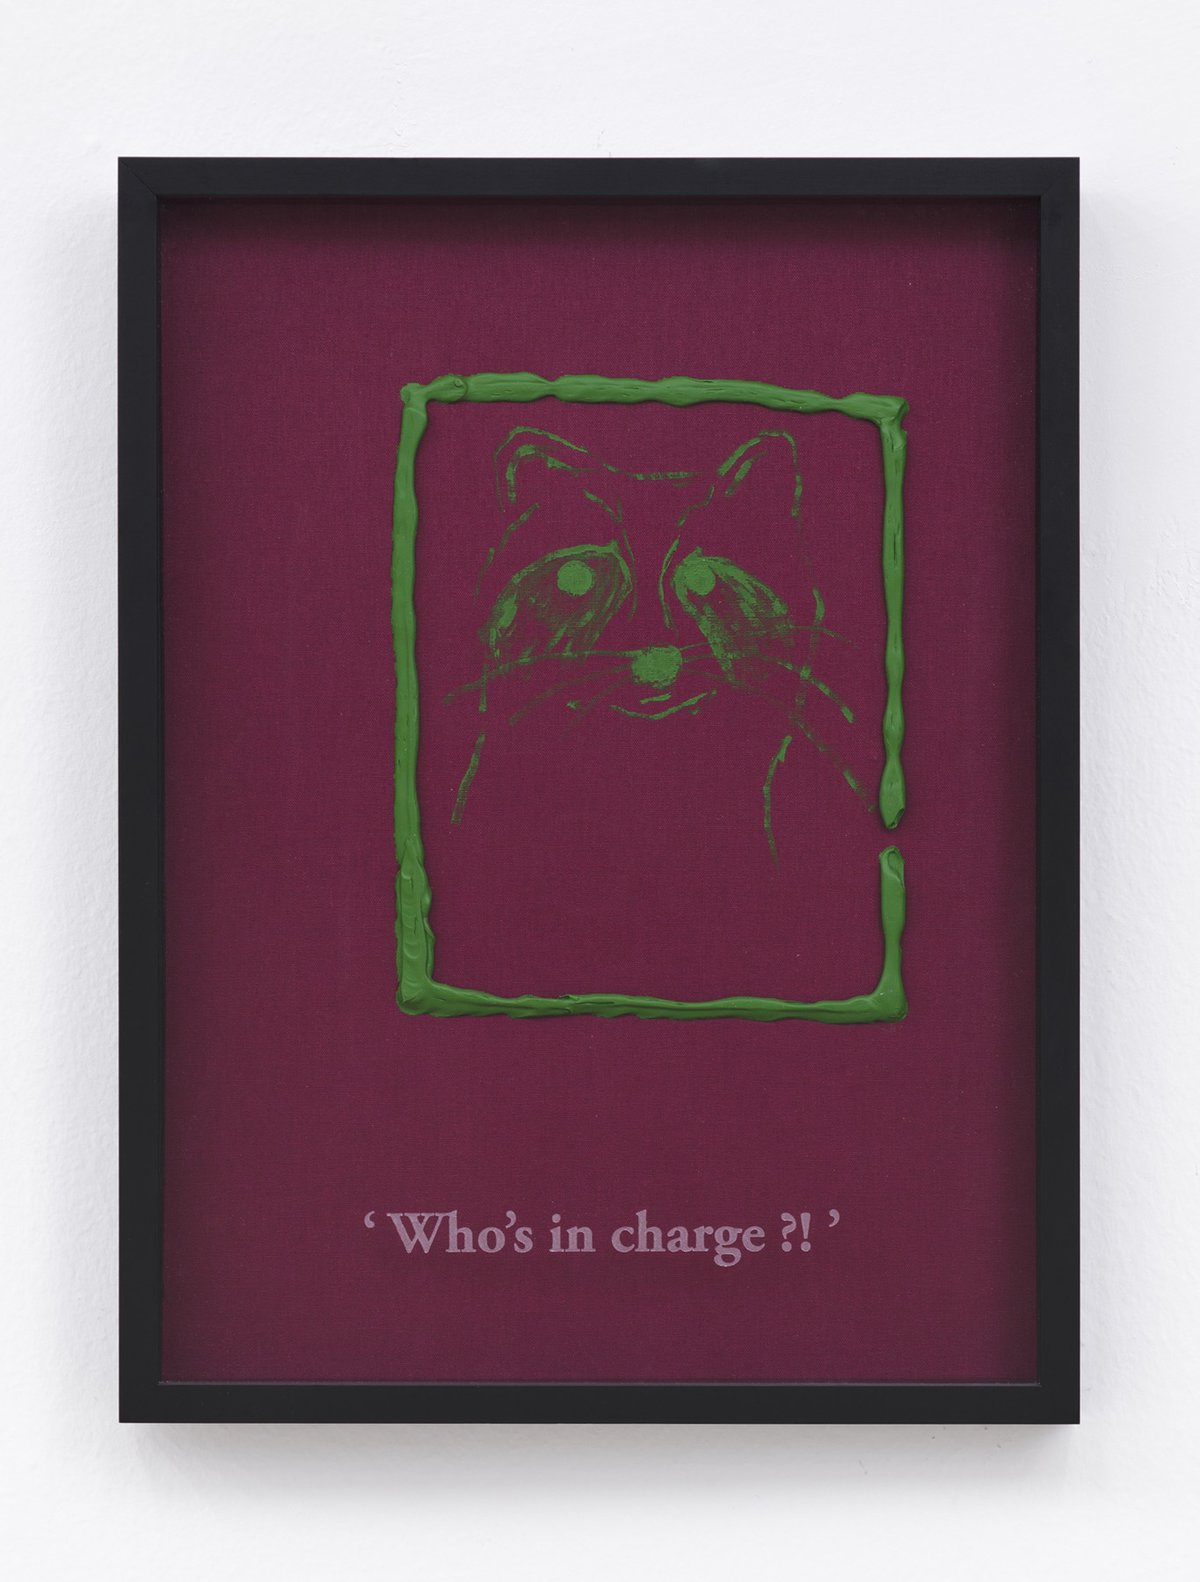 Philipp Timischl&quot;Who&#x27;s in charge?!&quot; (Burgundy/Oxide of Chromium), 2017Acrylic on linen and glass-engraved object frame40.1 x 32.1 cm